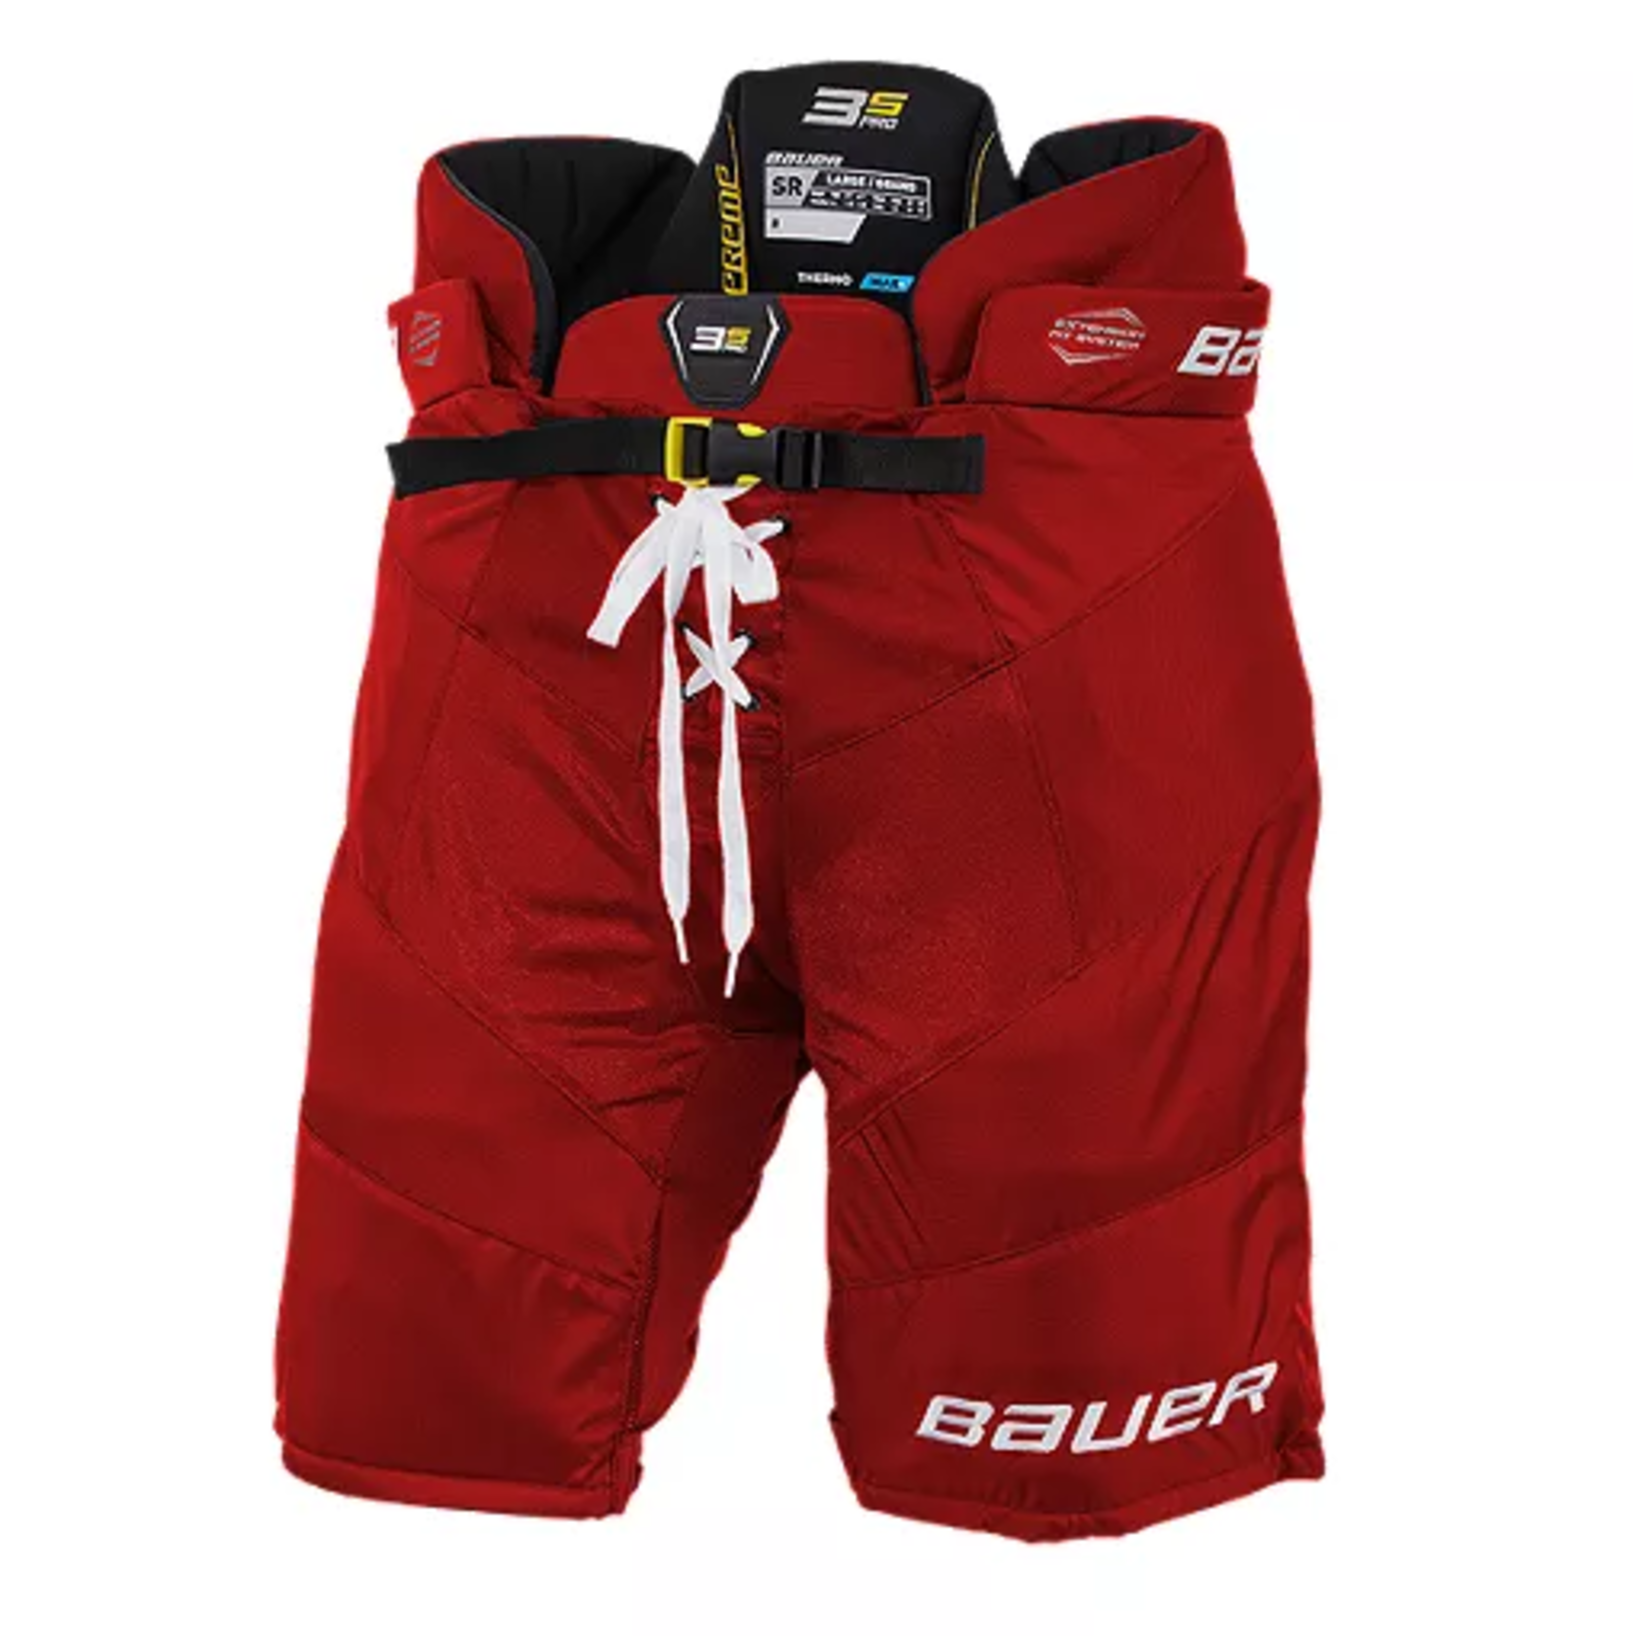 S21 BAUER Supreme 3S Pro Pant IN